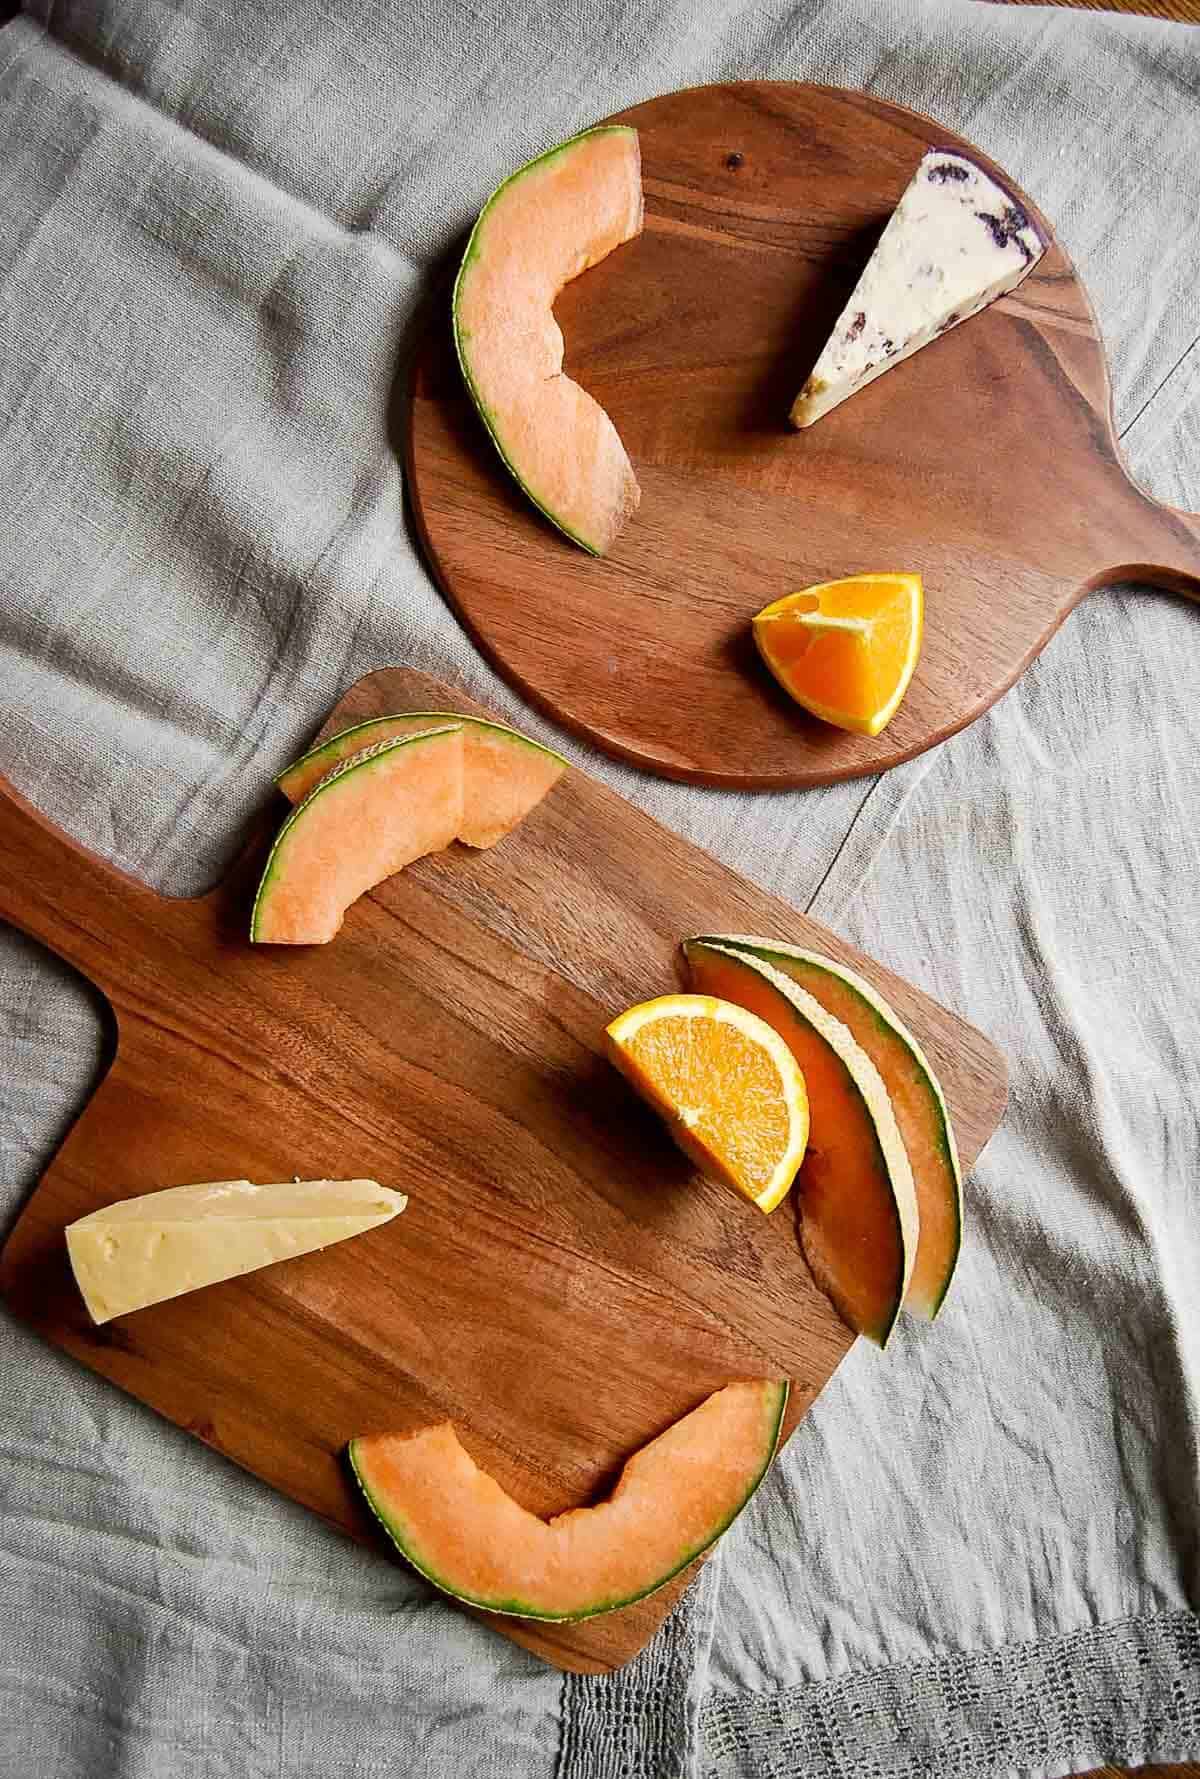 serving boards with cheese and fruit.